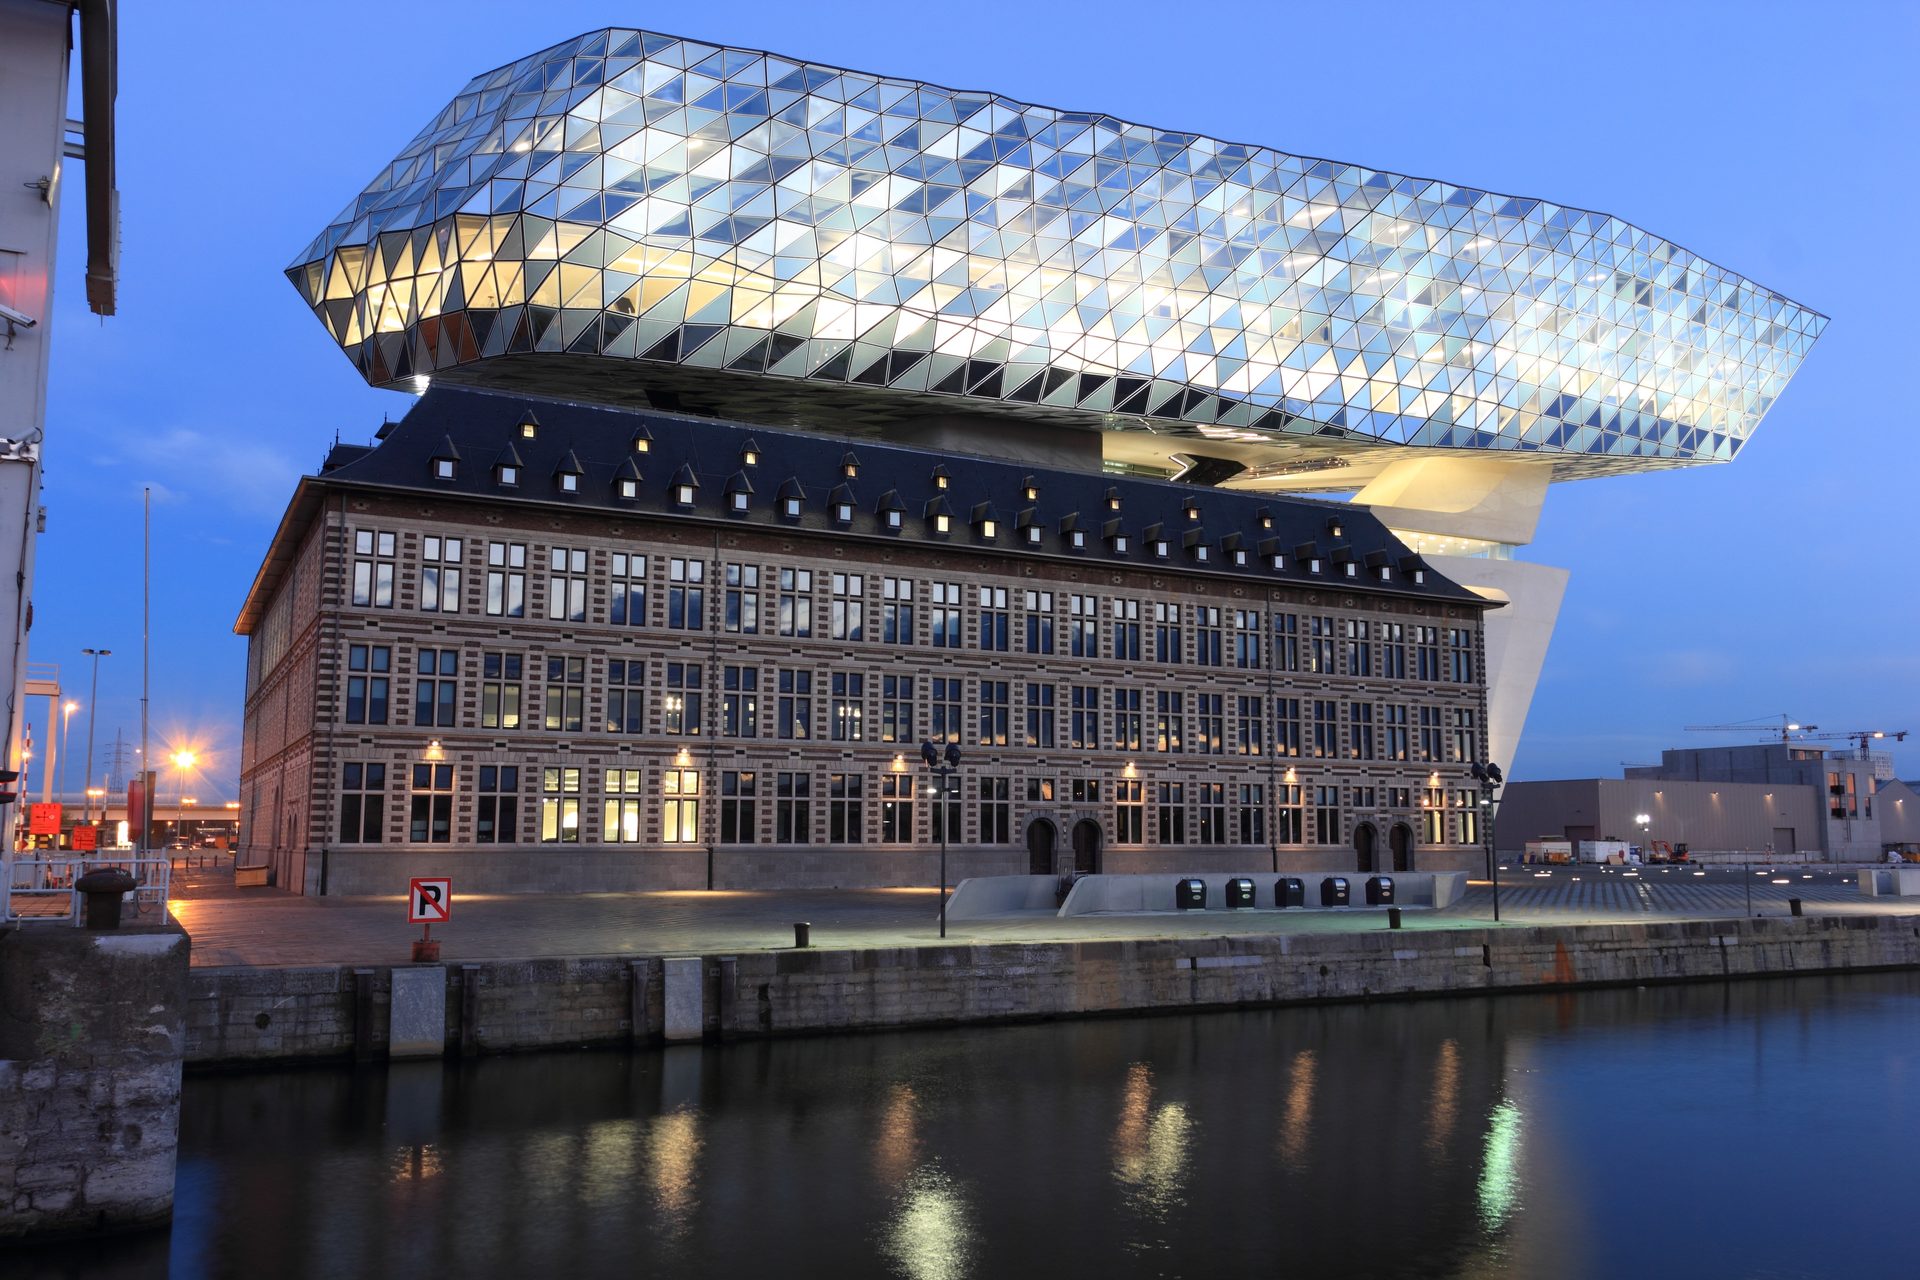 Belgium's image revived by architectural innovation